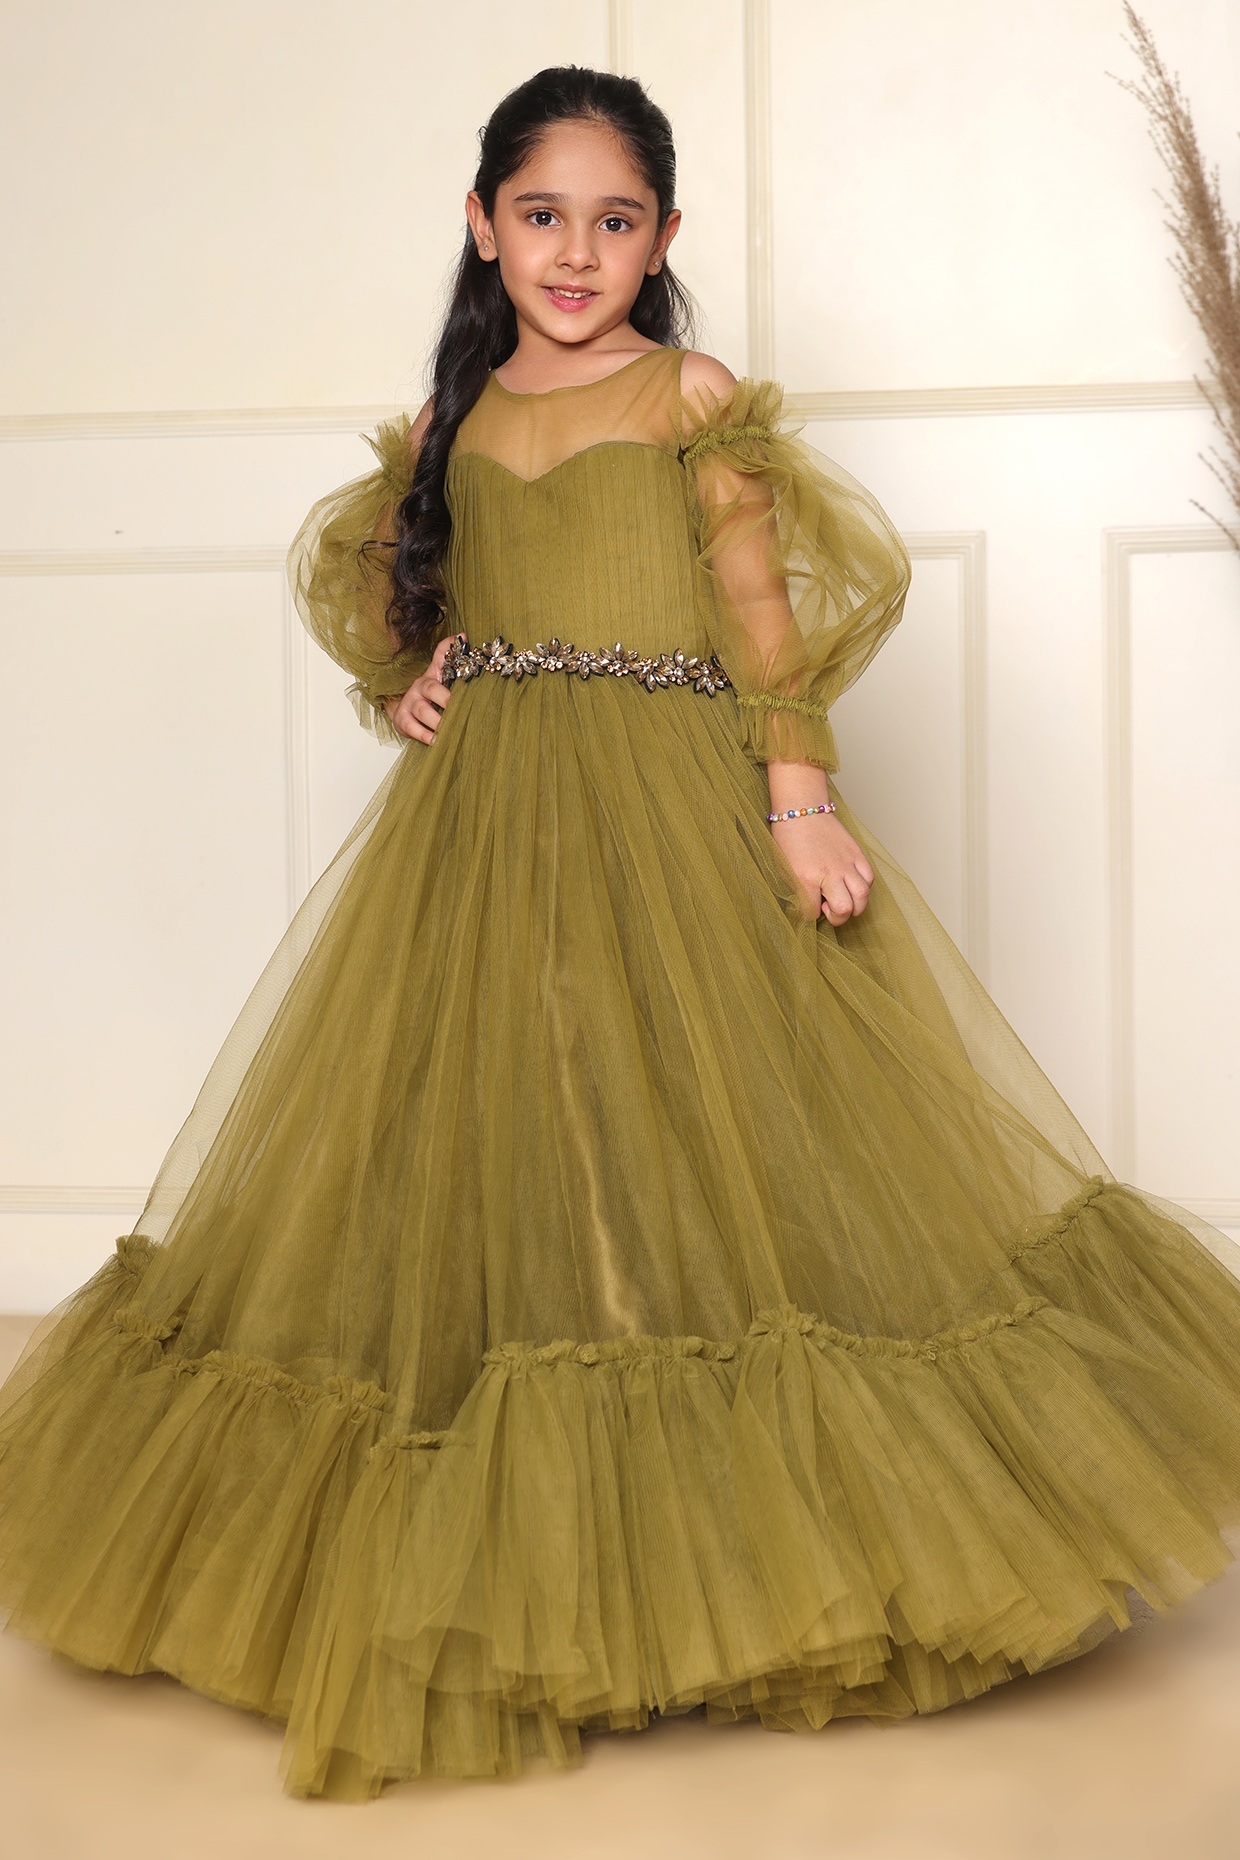 REEWAZ VOL 41 SOFT NET STYLISH LATEST GIRLS CHOICE FULL FRILLED BEAUTIFUL EVENING  GOWN BEST COLLECTION ONLINE SUPPLIER IN INDIA MALAYSIA SINGAPORE - Reewaz  International | Wholesaler & Exporter of indian ethnic wear catalogs.